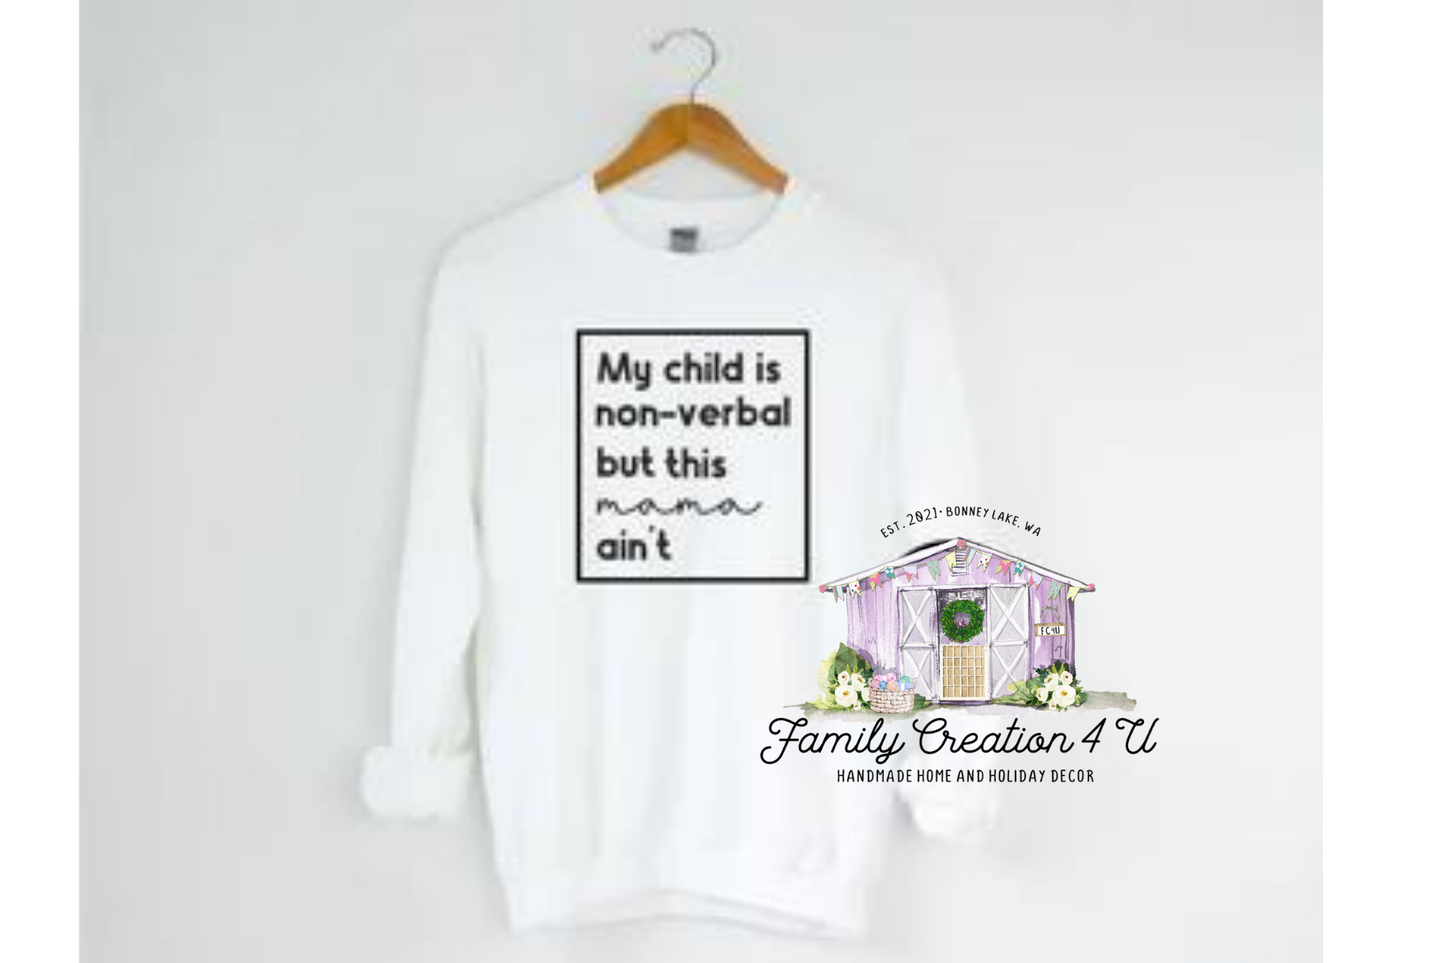 My Child is Non-Verbal Screen printed Short sleeve shirt